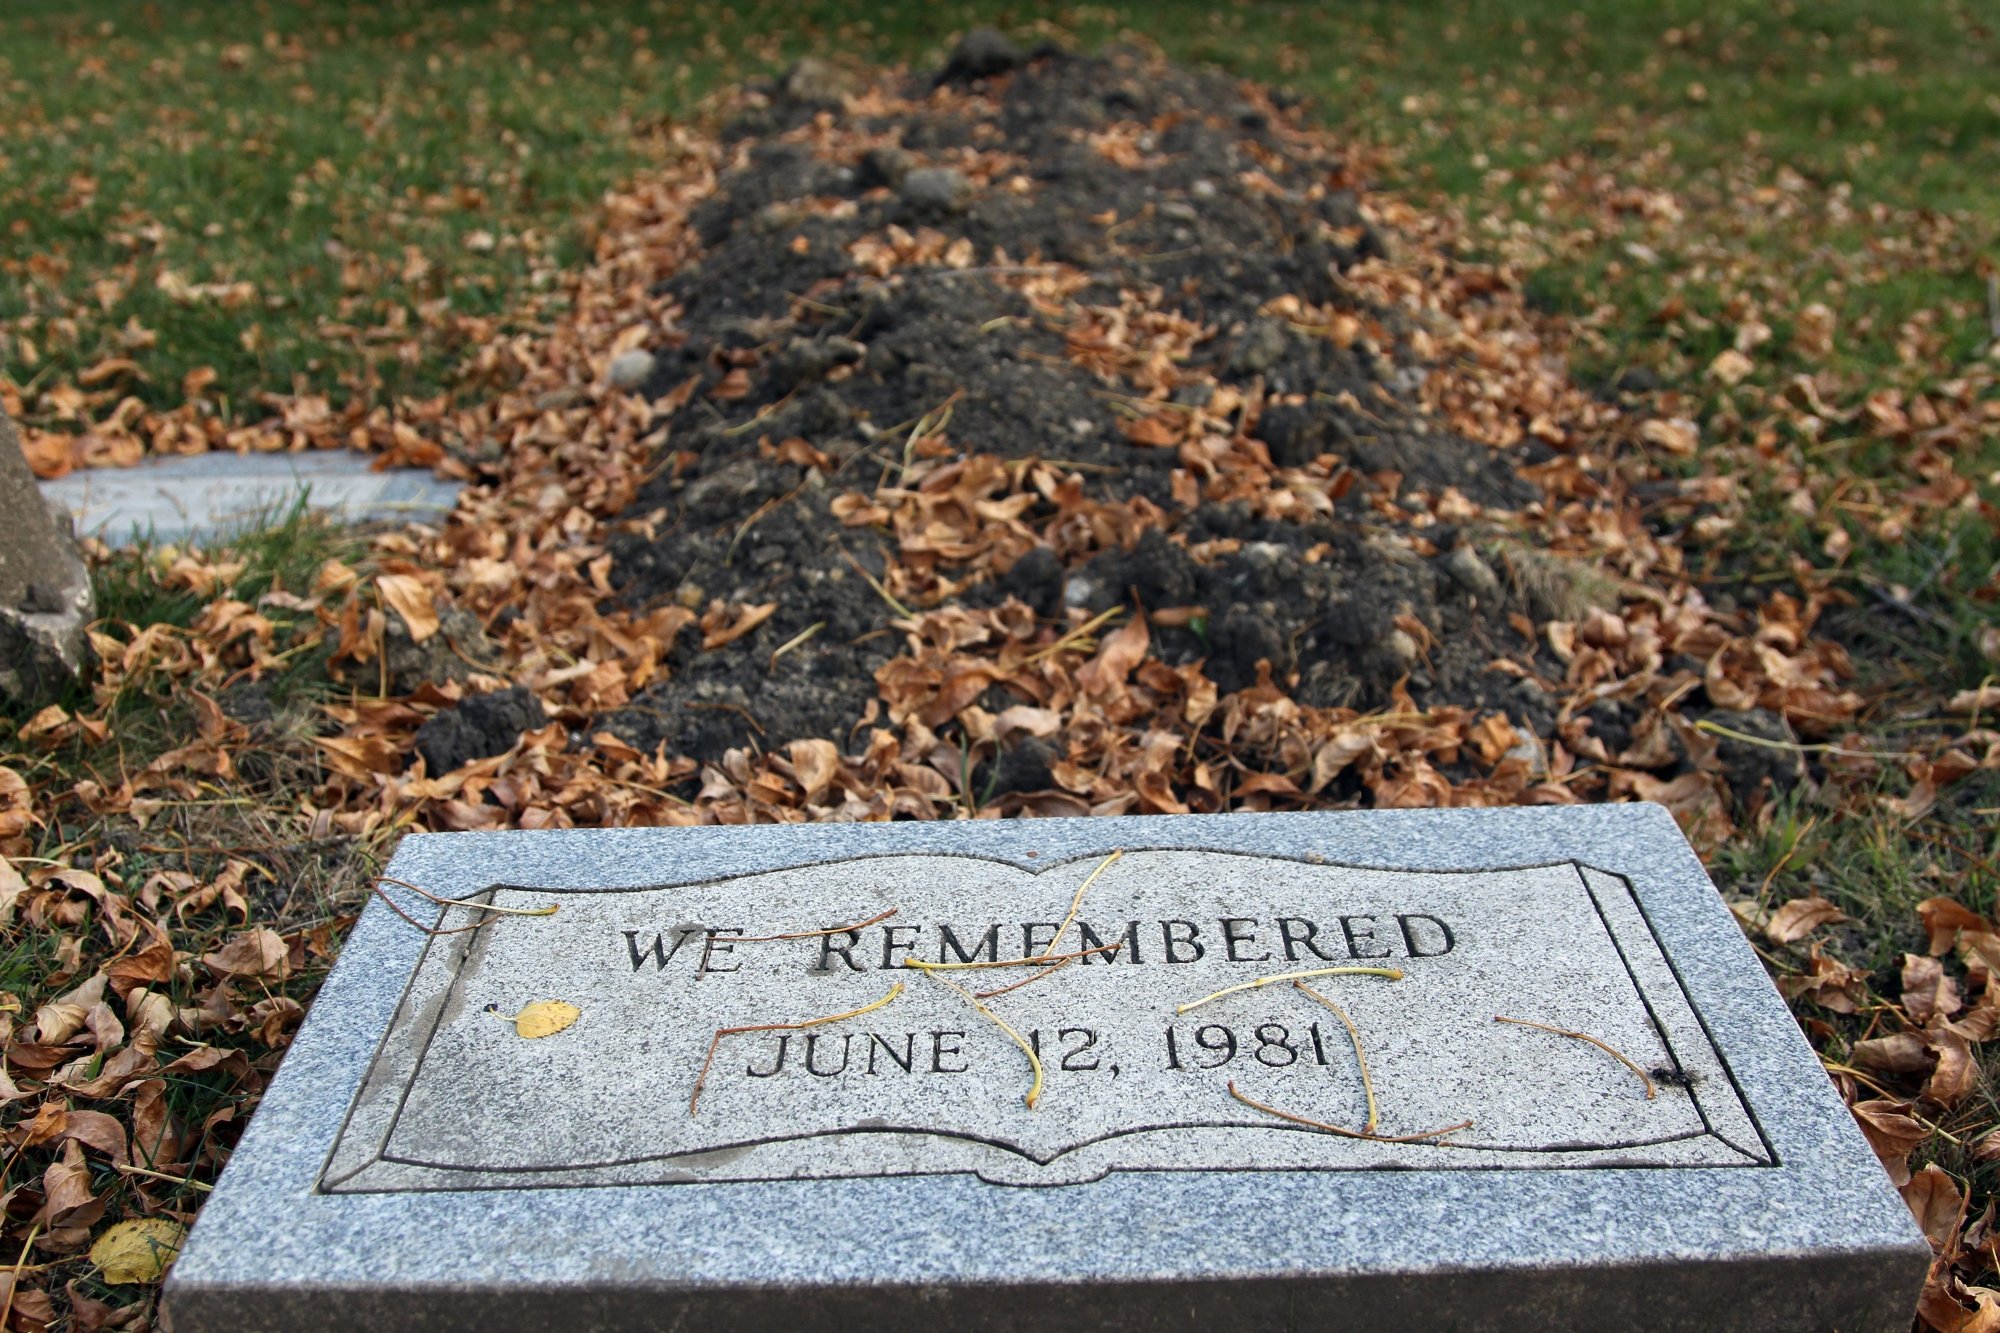 Grave of unidentified victim of John Wayne Gacy with leaves on the ground